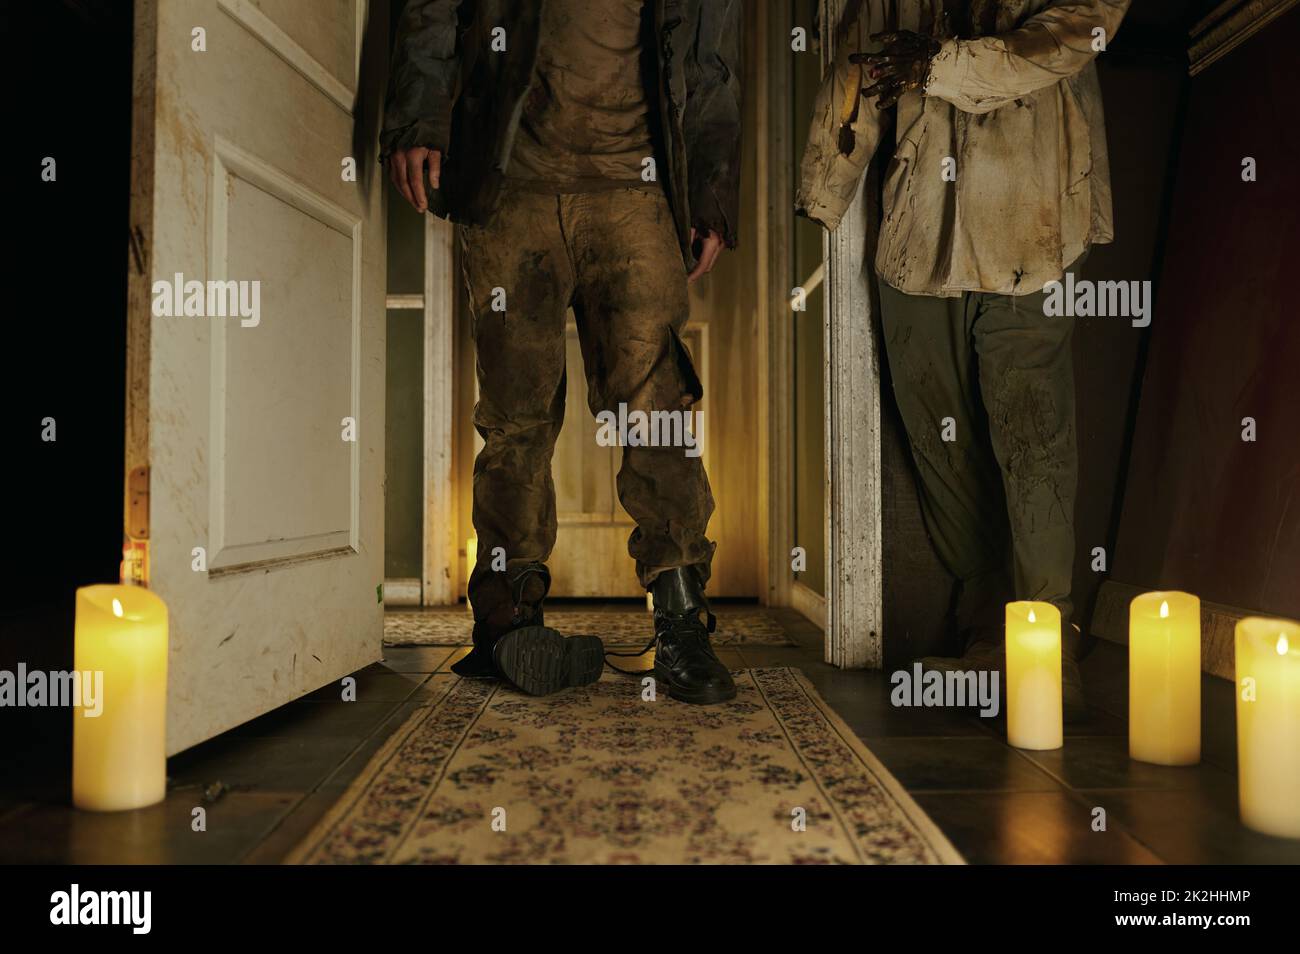 Scary zombie corpse in the house interior Stock Photo